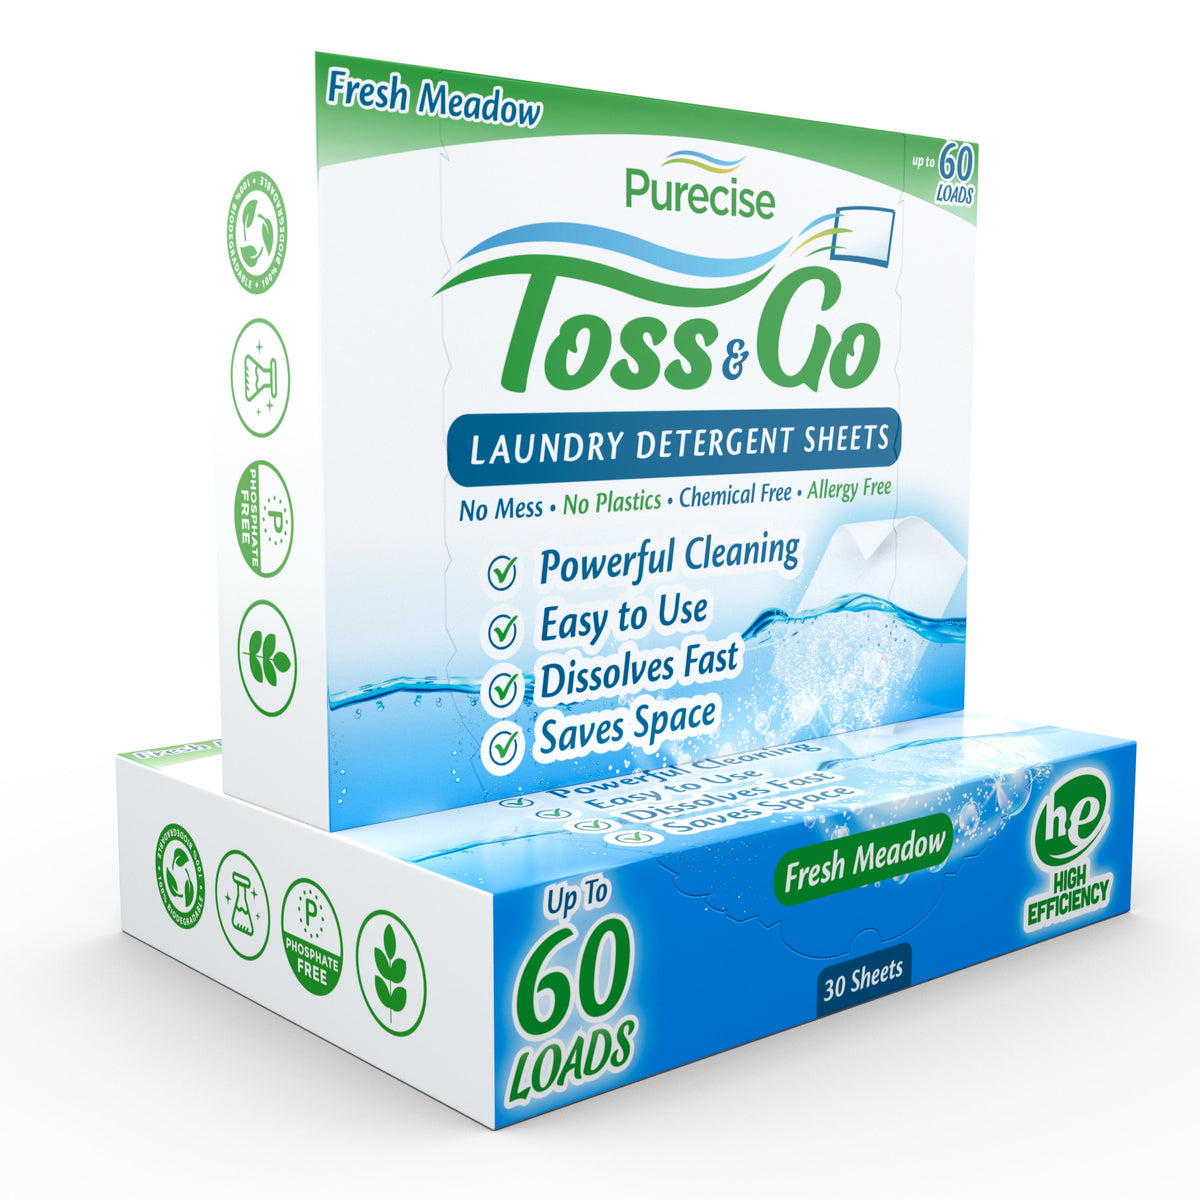 Toss &amp; Go Laundry Detergent Sheets by Purecise